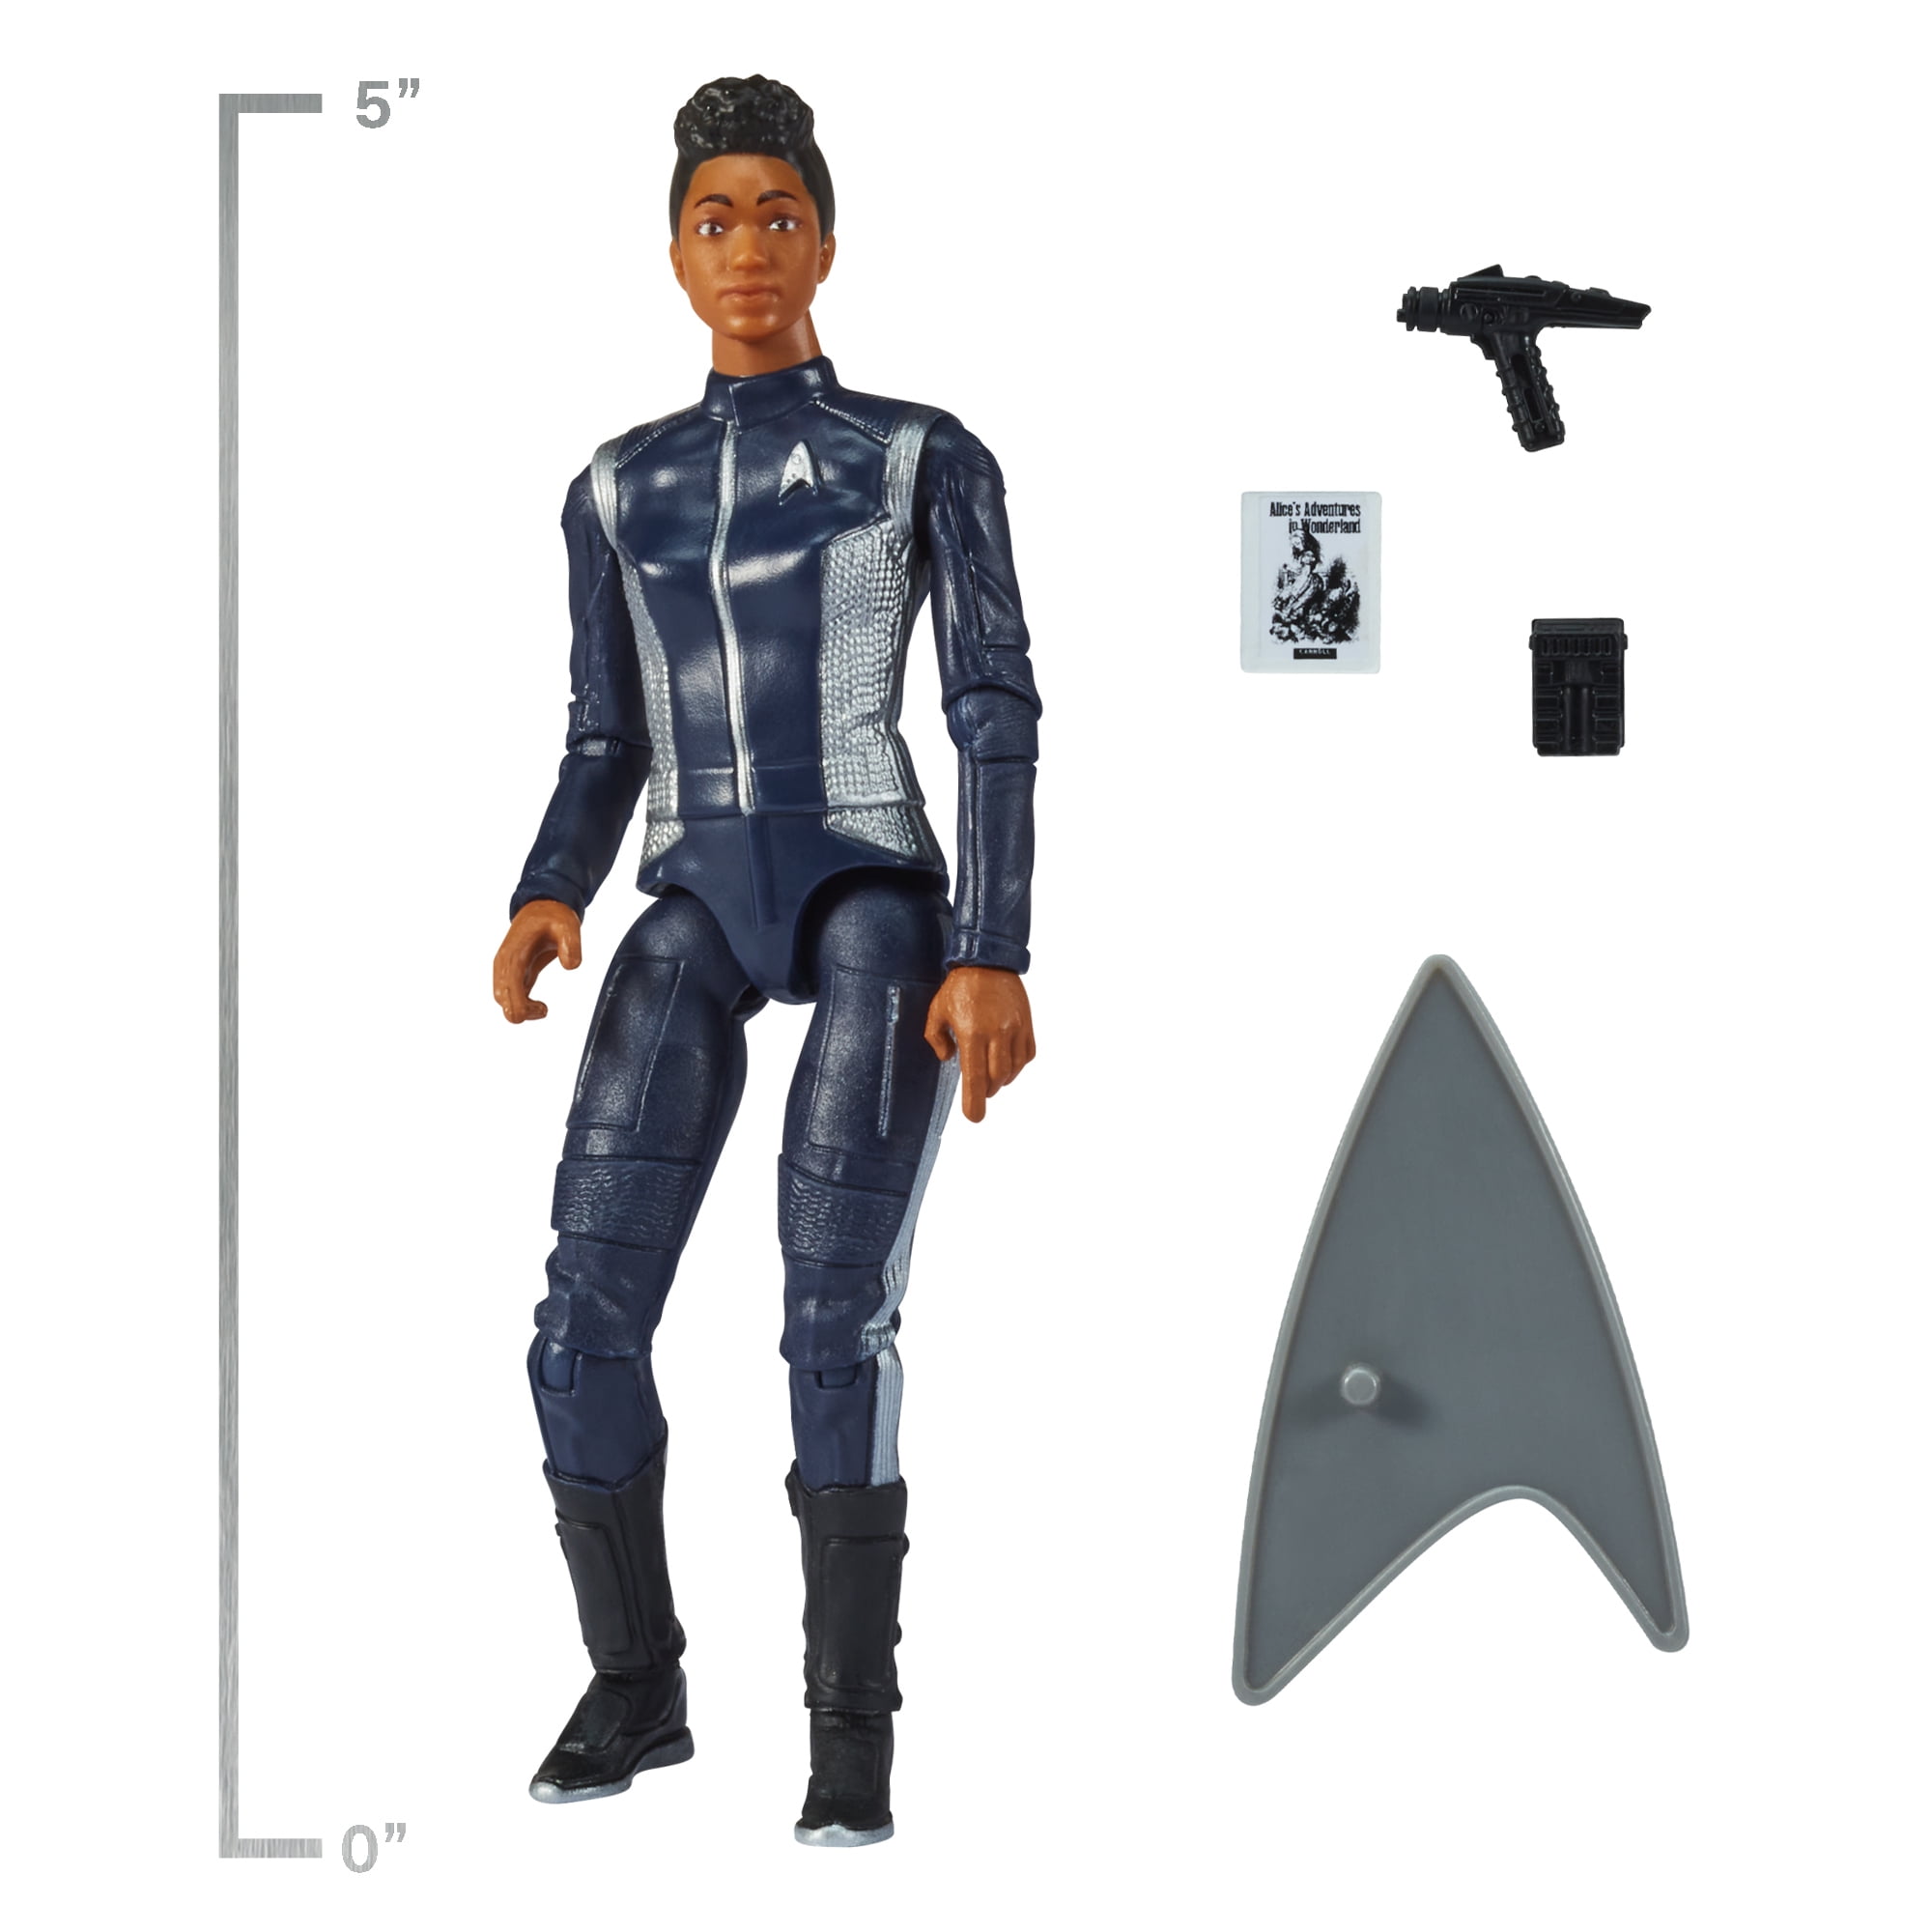 5'' Star Trek Discovery Science Officer Michael Burnham Action Figure w/ Accessories  $2.67  + Free S&H w/ Walmart+ or $35+